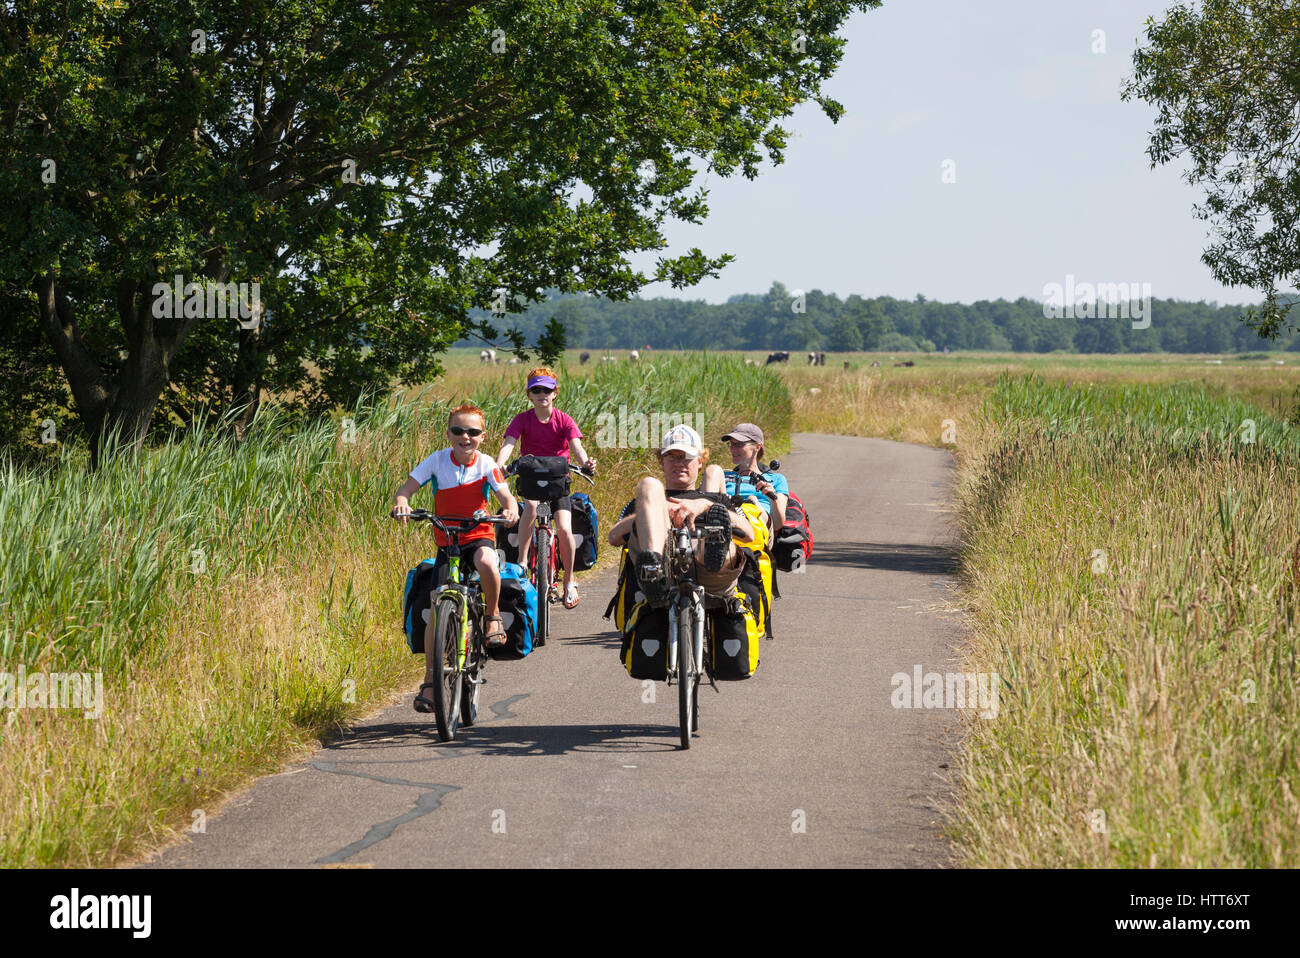 Family on holiday bicycle trip with recumbents and bicycles in the Netherlands Stock Photo